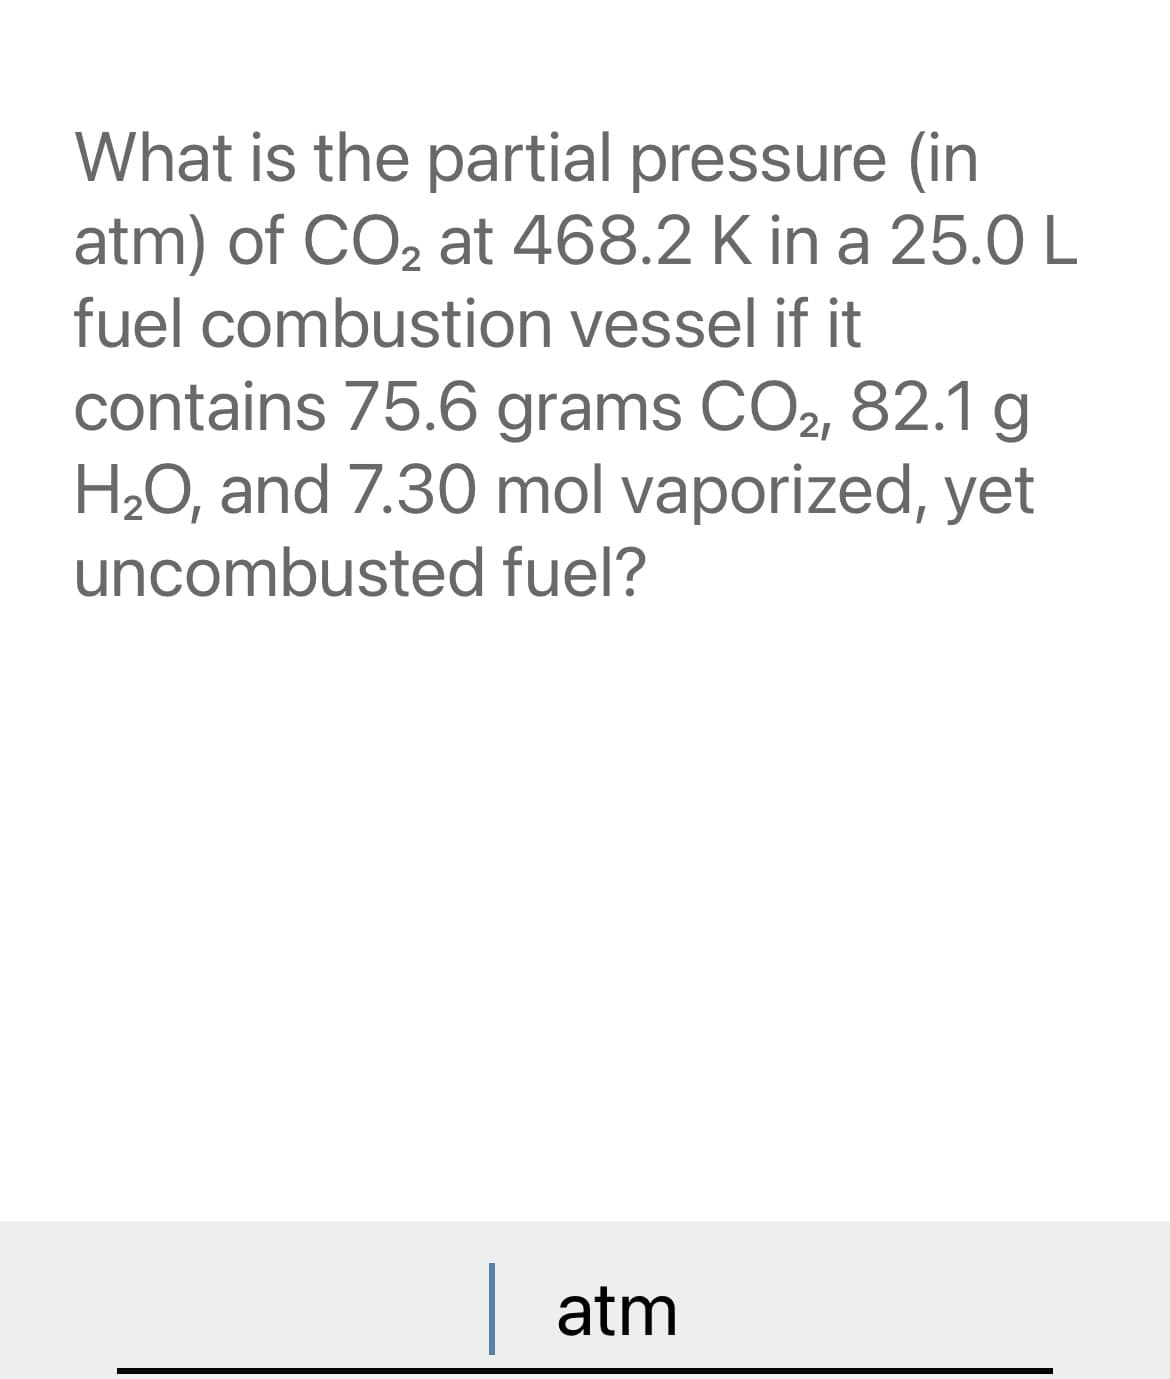 What is the partial pressure (in
atm) of CO₂ at 468.2 K in a 25.0 L
fuel combustion vessel if it
contains 75.6 grams CO2, 82.1 g
H₂O, and 7.30 mol vaporized, yet
uncombusted fuel?
| atm